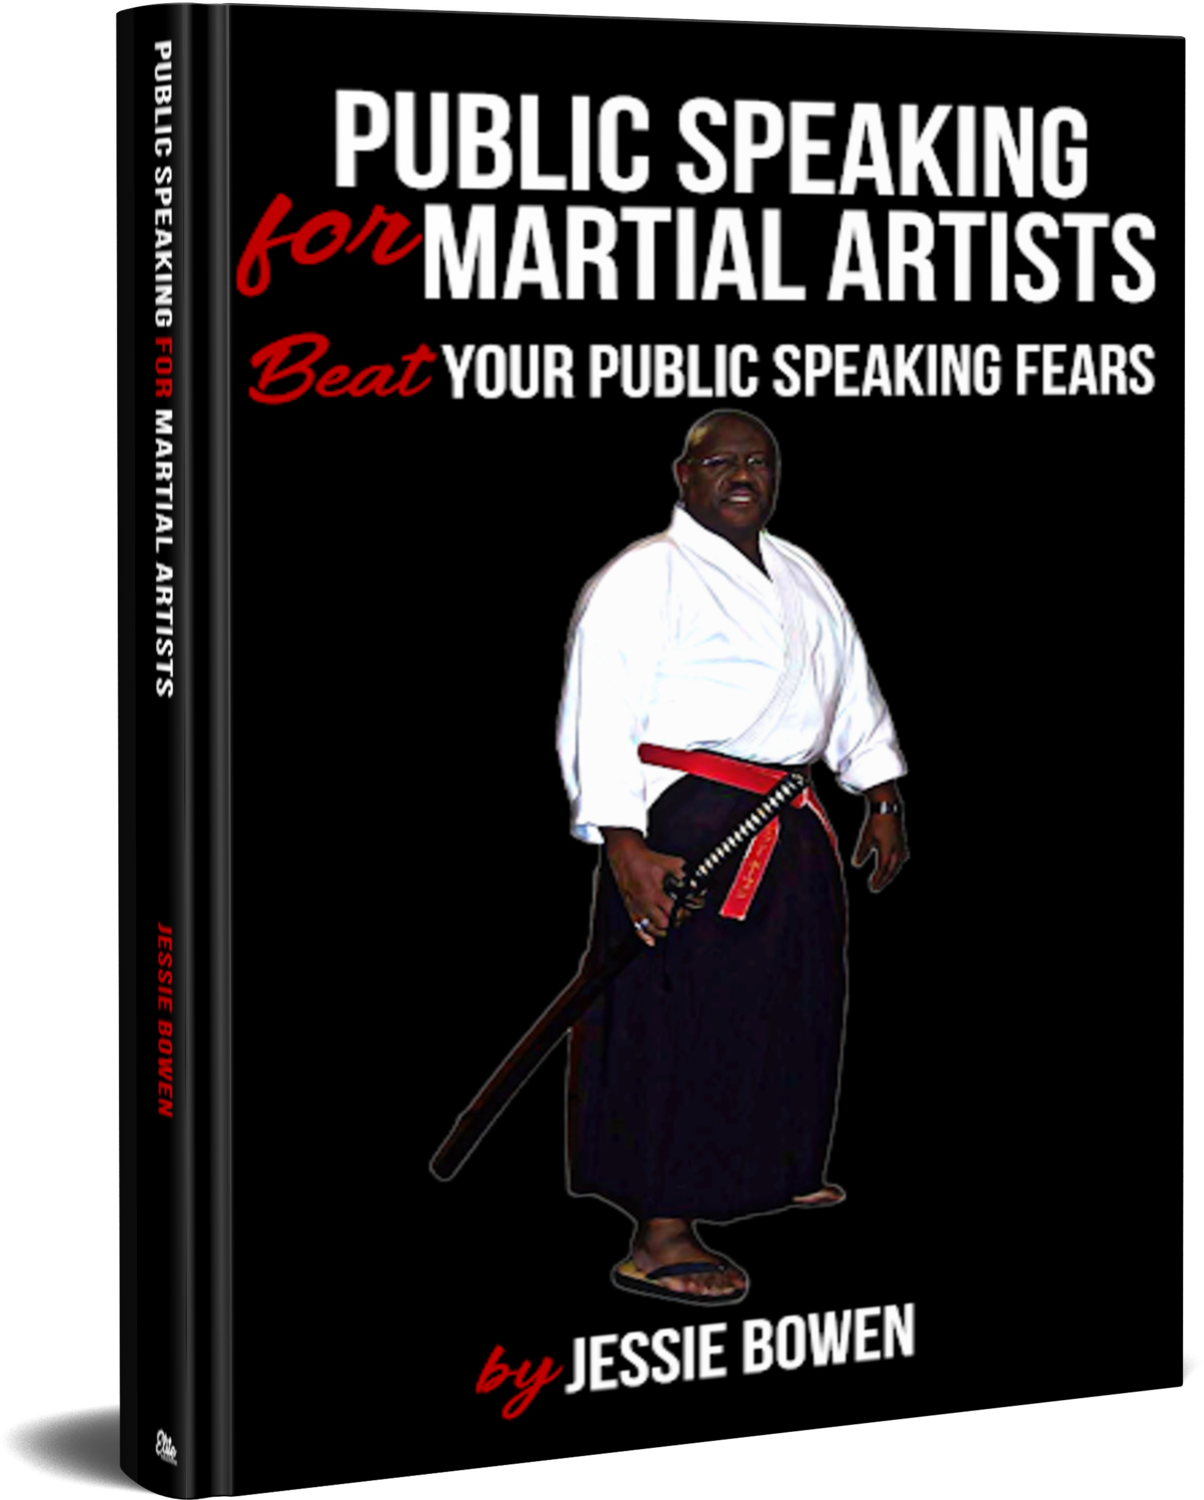 Public Speakings For Martial Artists: Winning The Public Speaking Game Book